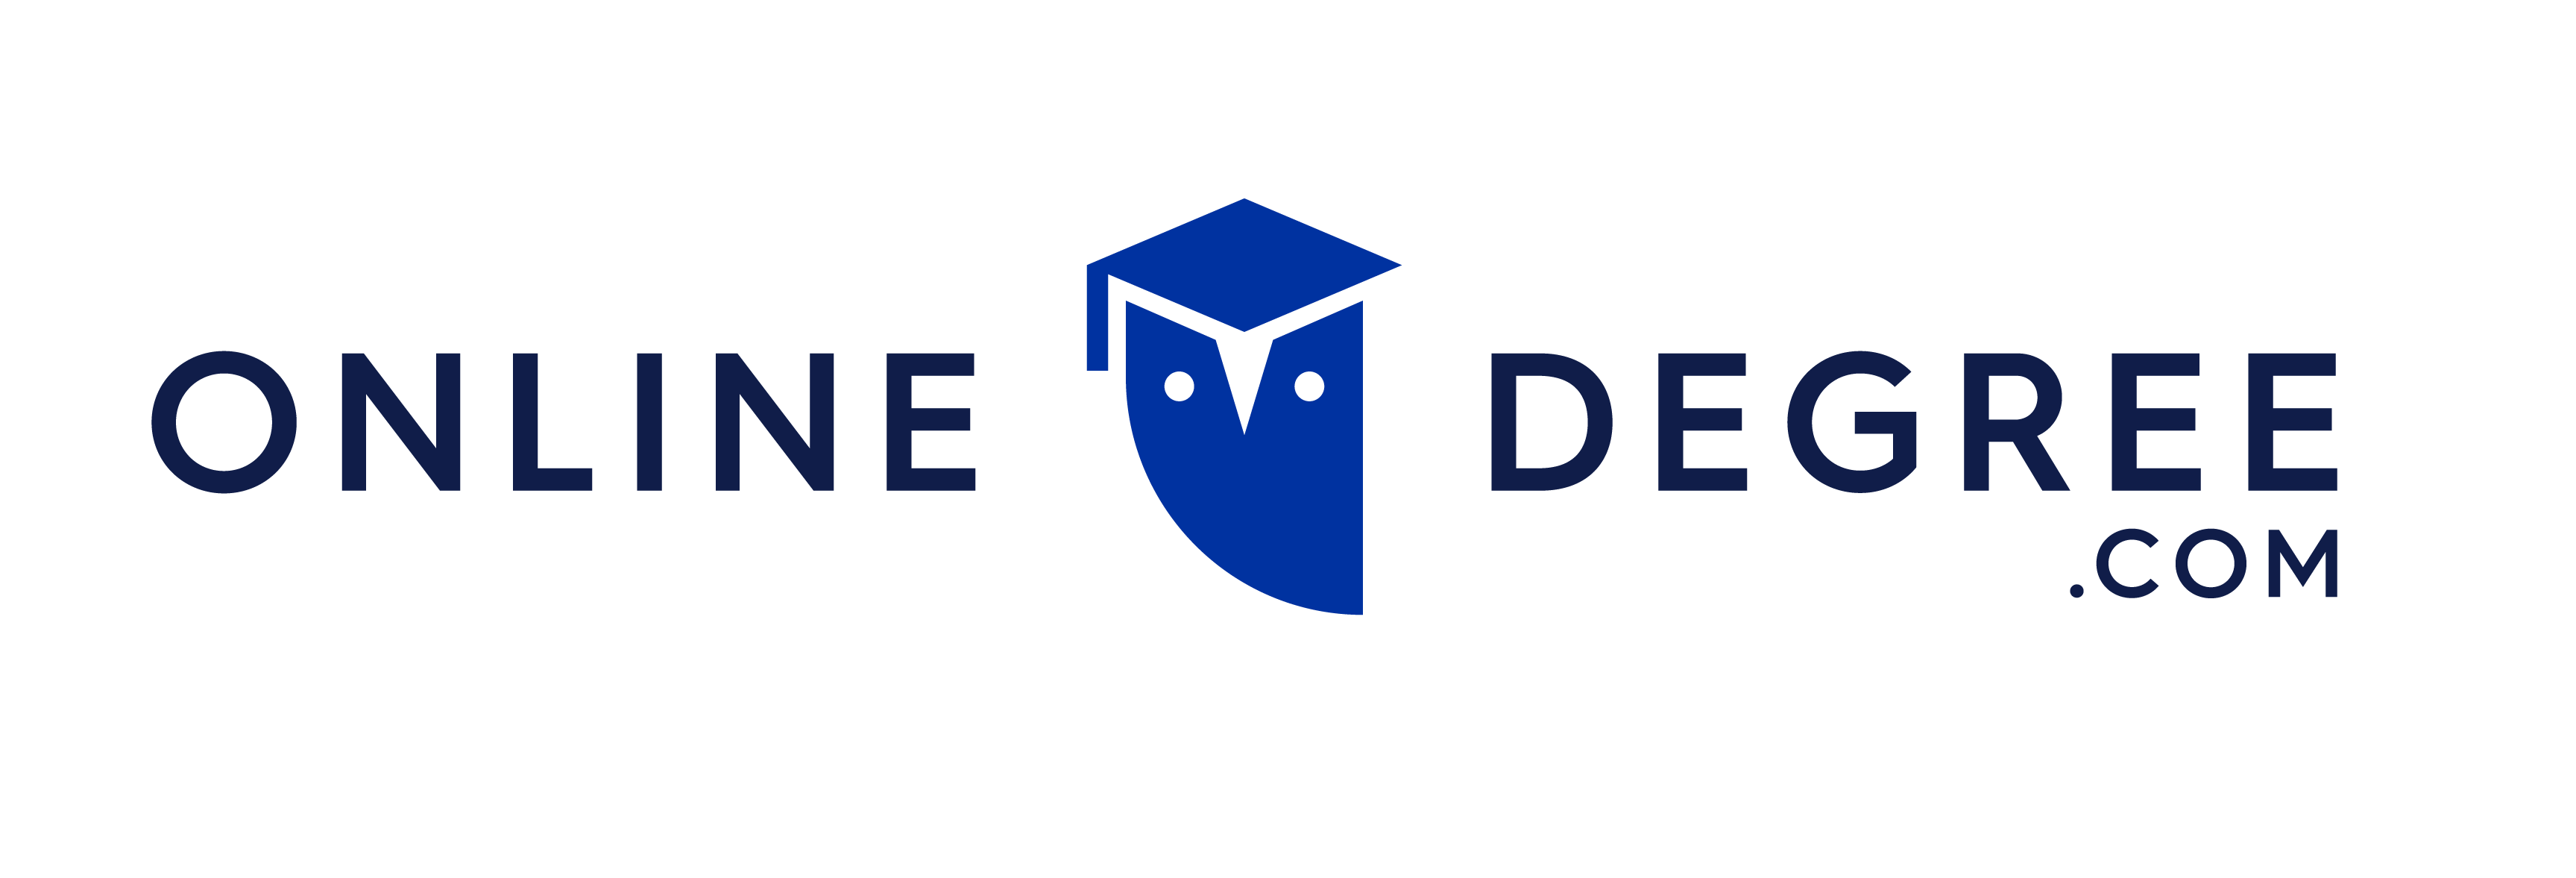 OnlineDegree Logo-cropped.png